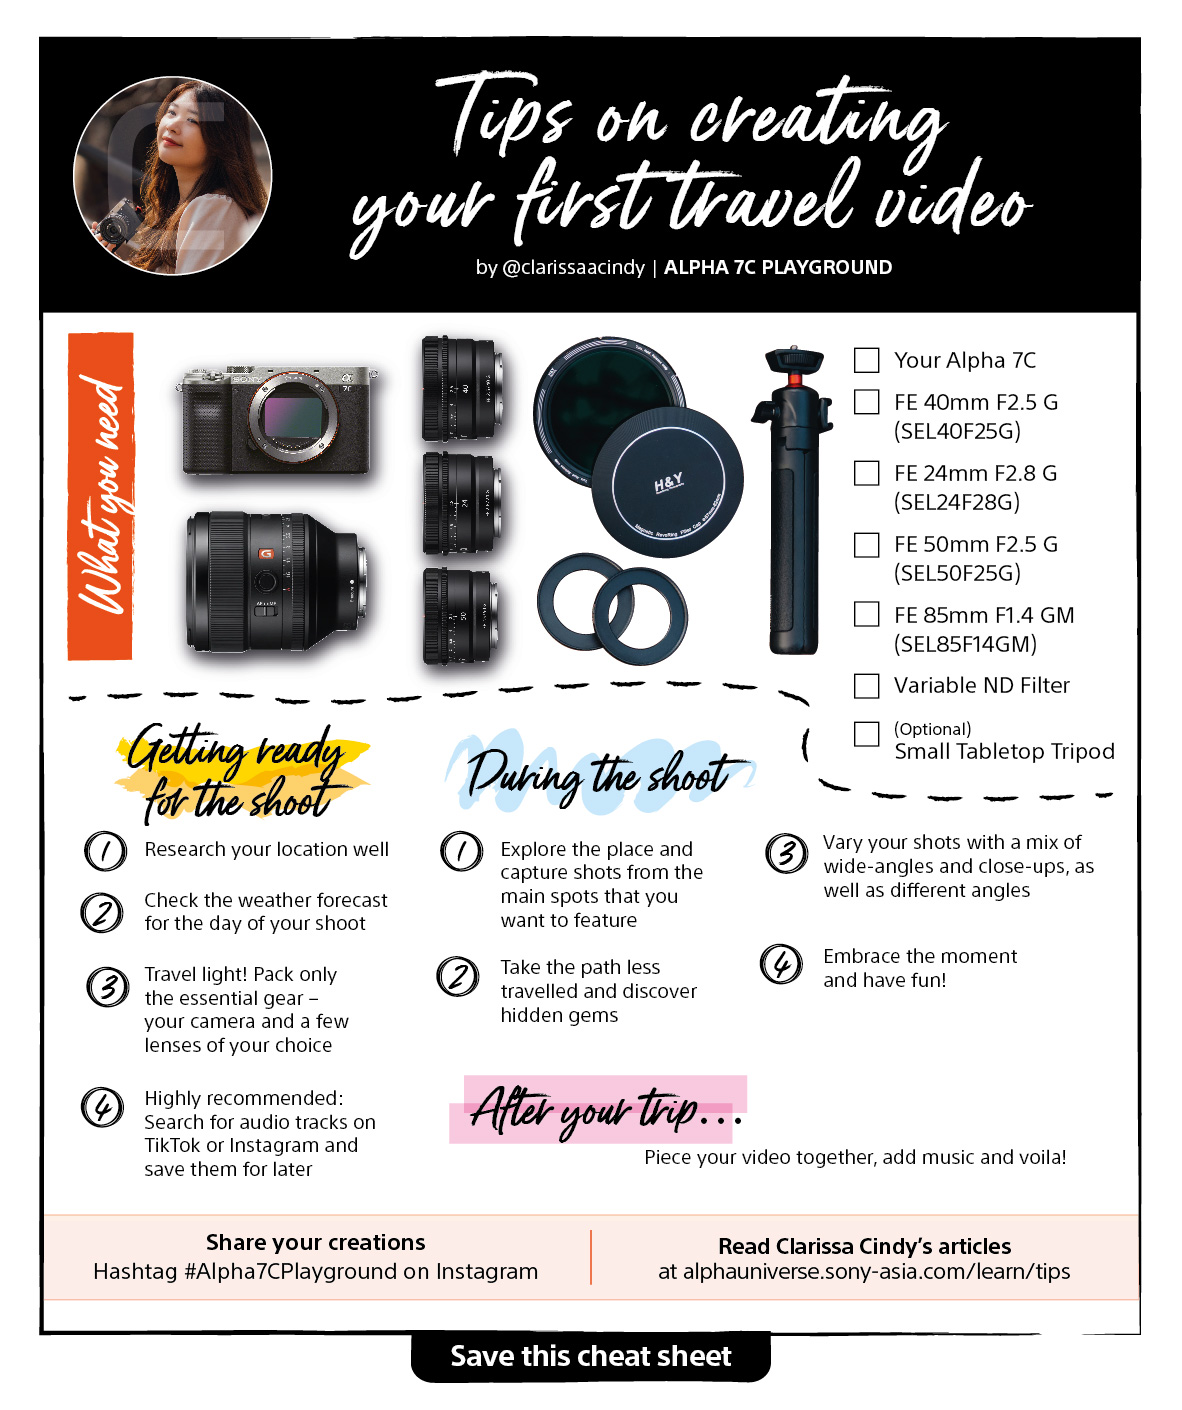 Clarissa Cindy's cheat sheet - Shooting Your First Travel Video